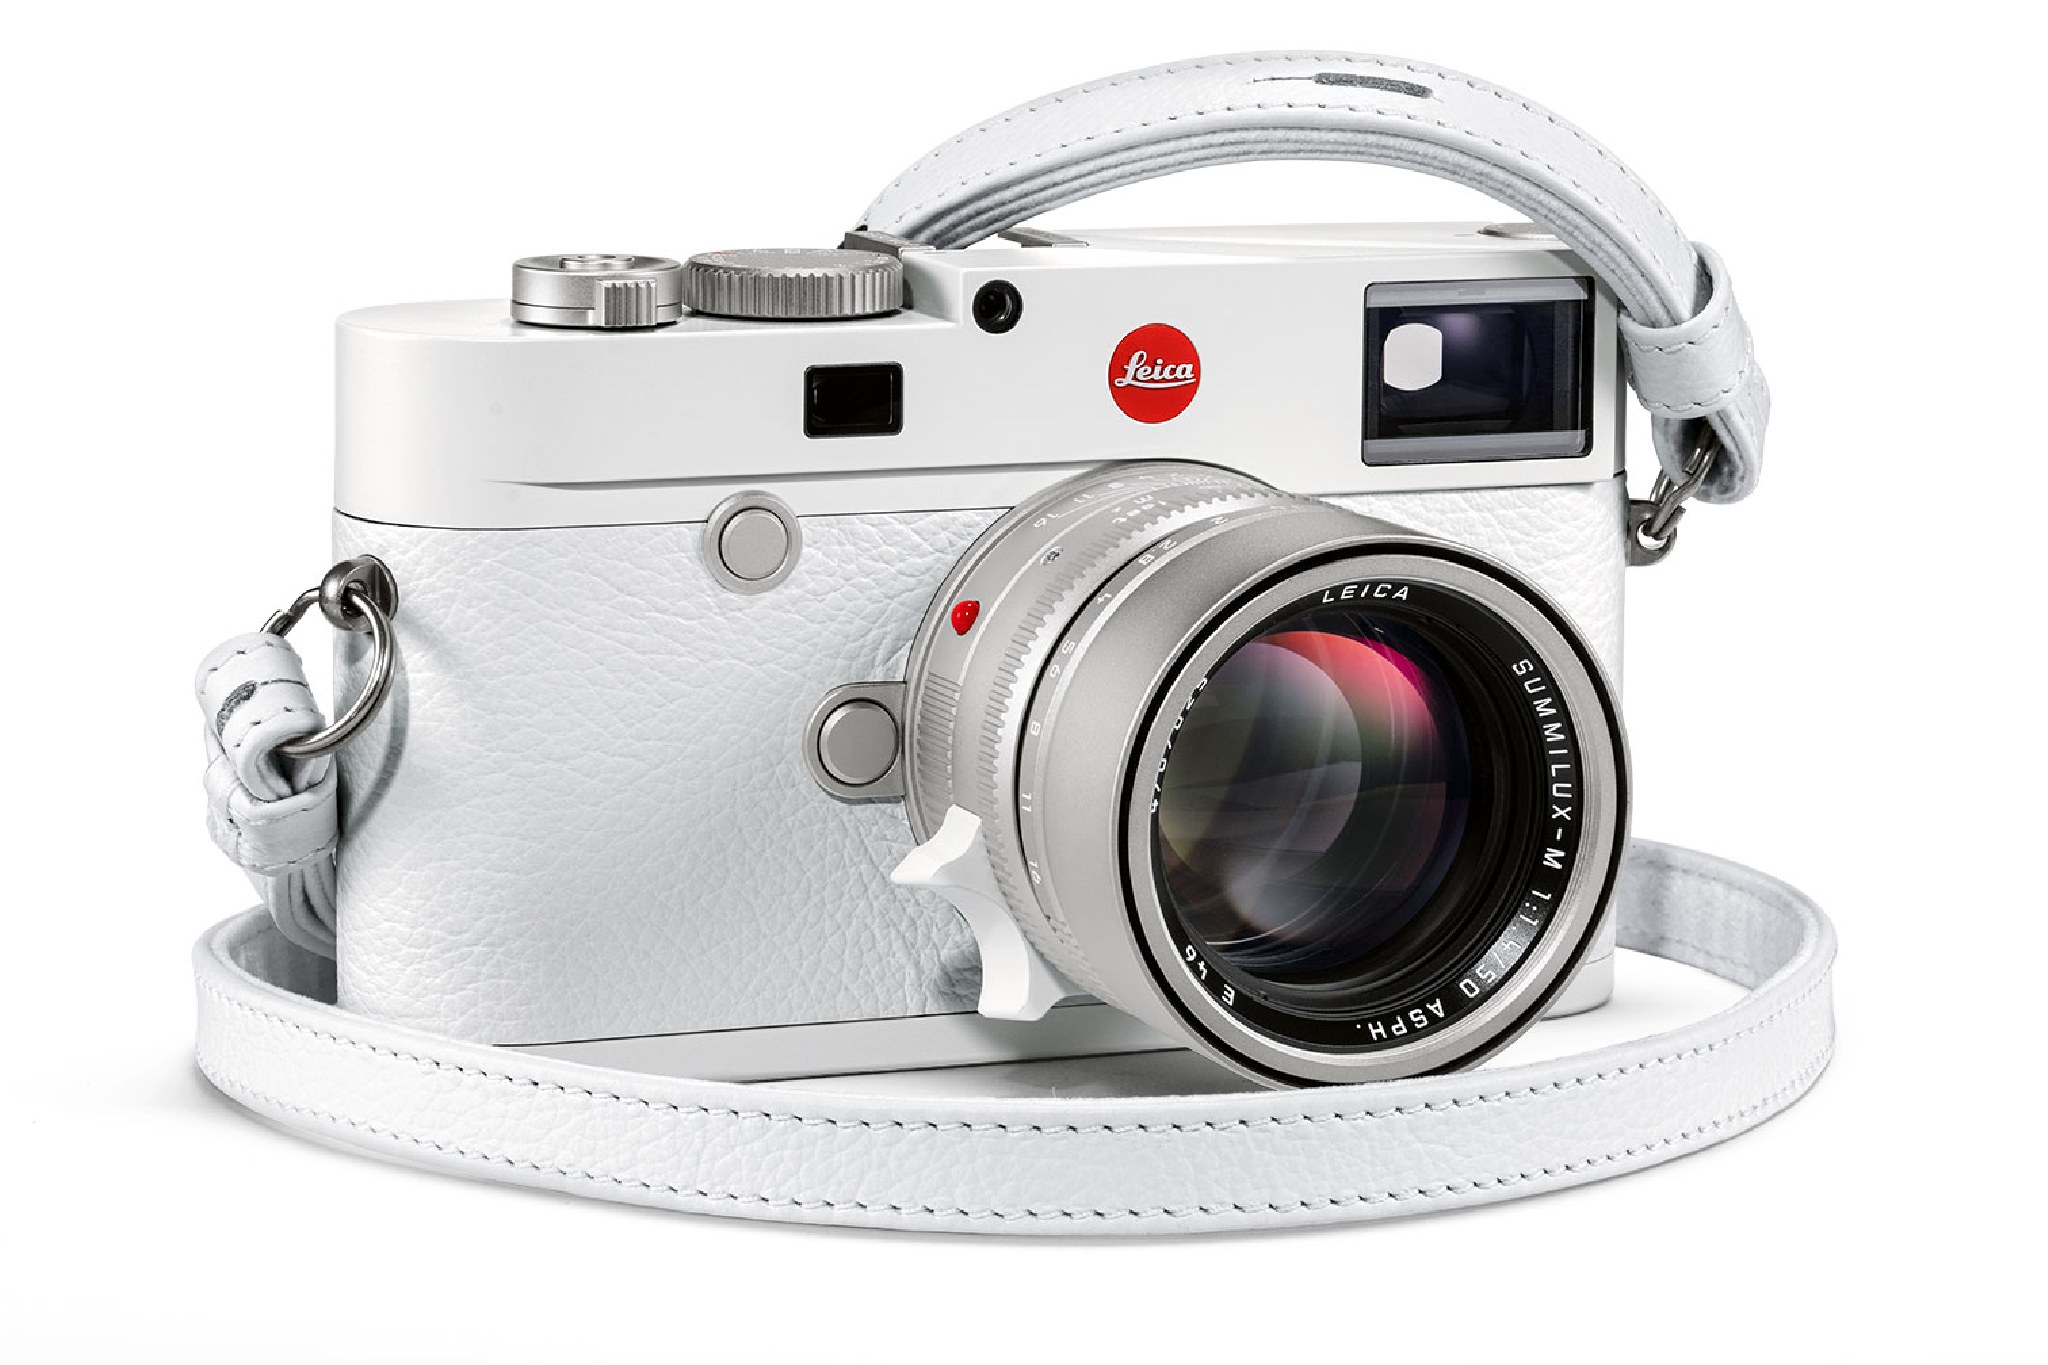 all-white-Leica-M10-limited-edition-camera-3.jpg